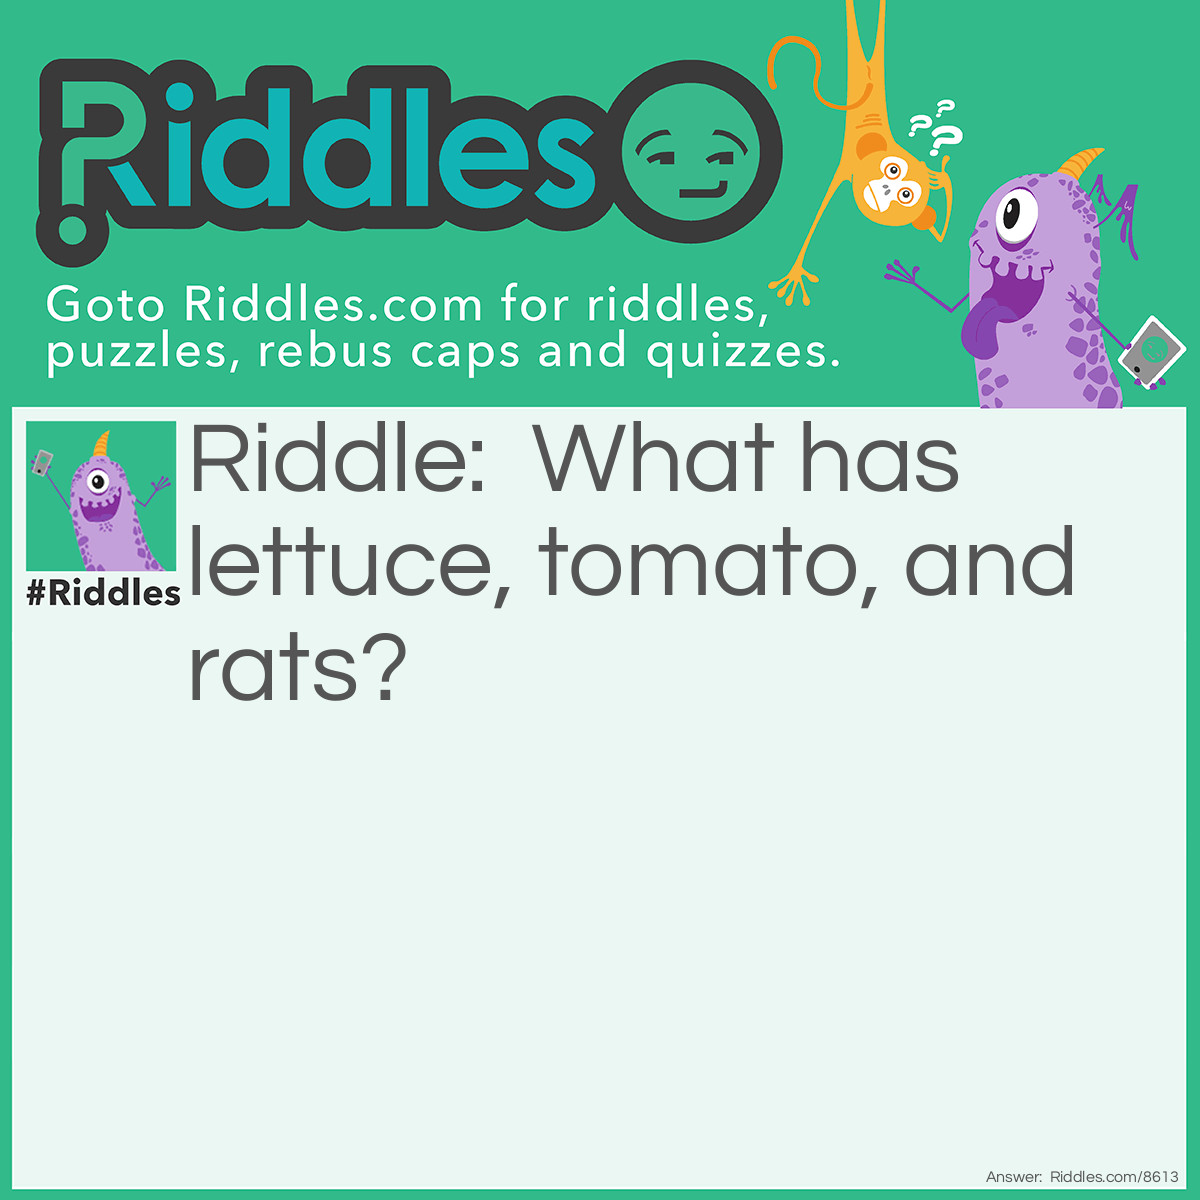 Riddle: What has lettuce, tomato, and rats? Answer: Rat salad.